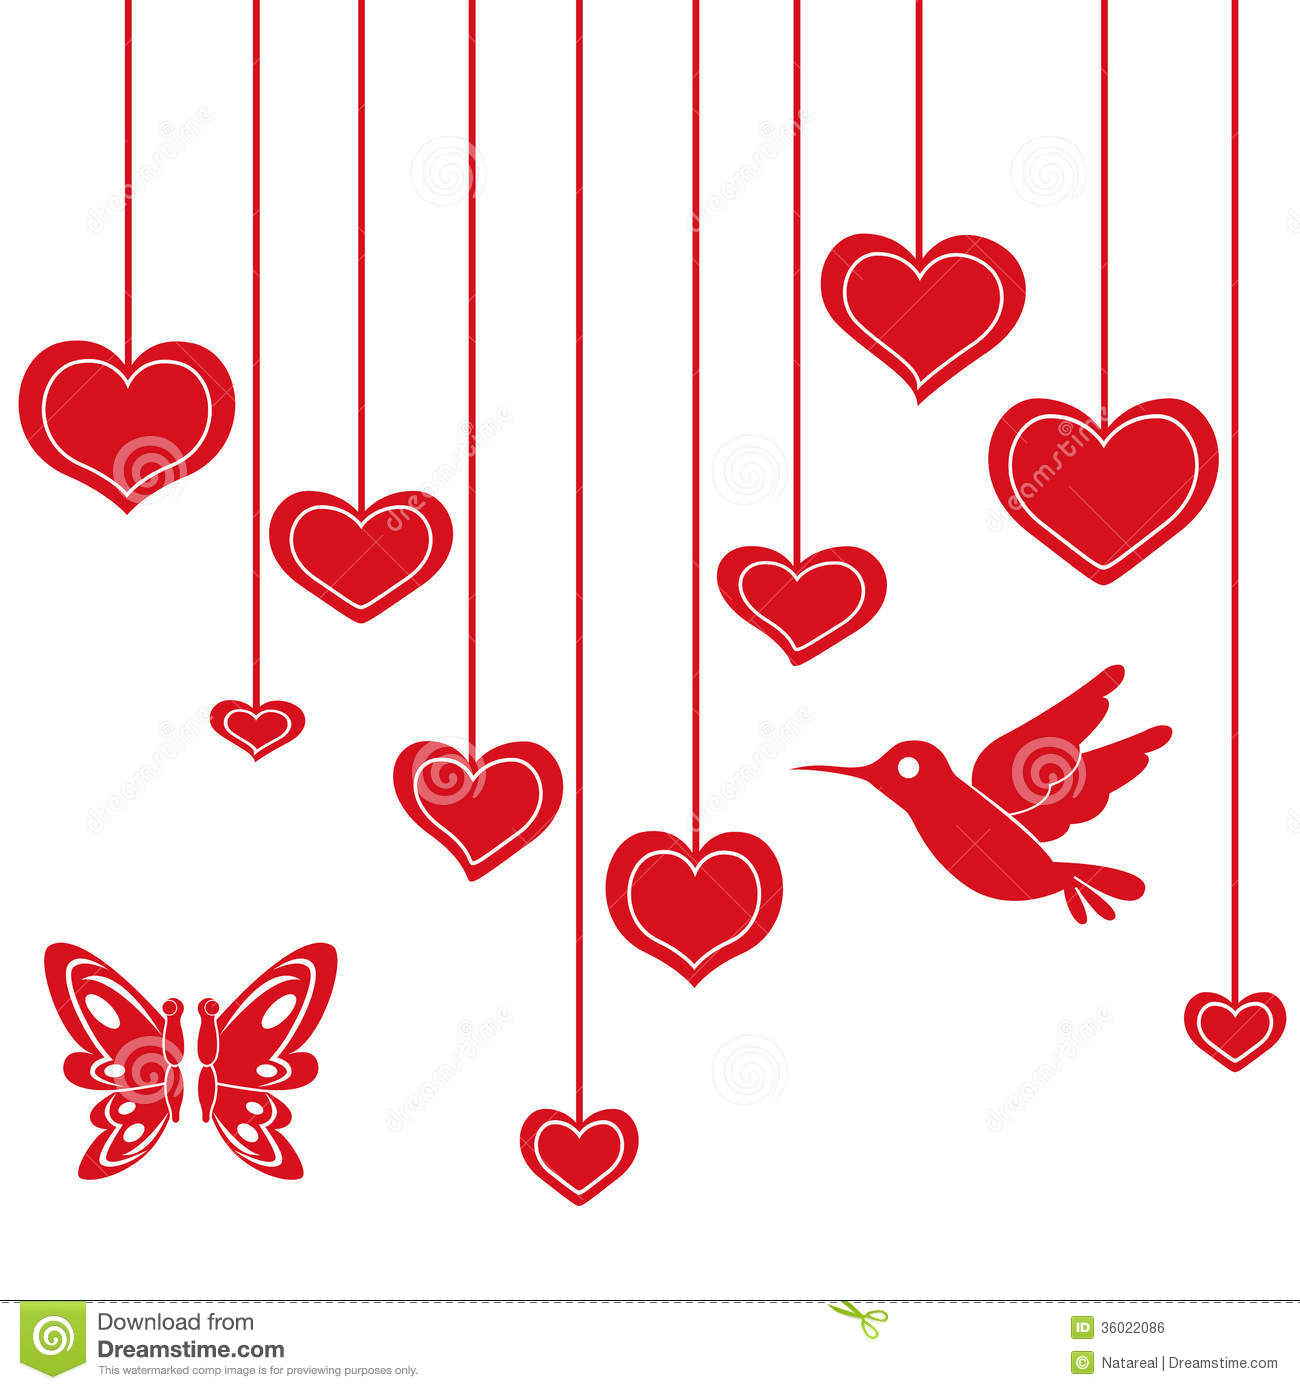 Red Hearts Hanging On A String Royalty Free Stock Image   Image